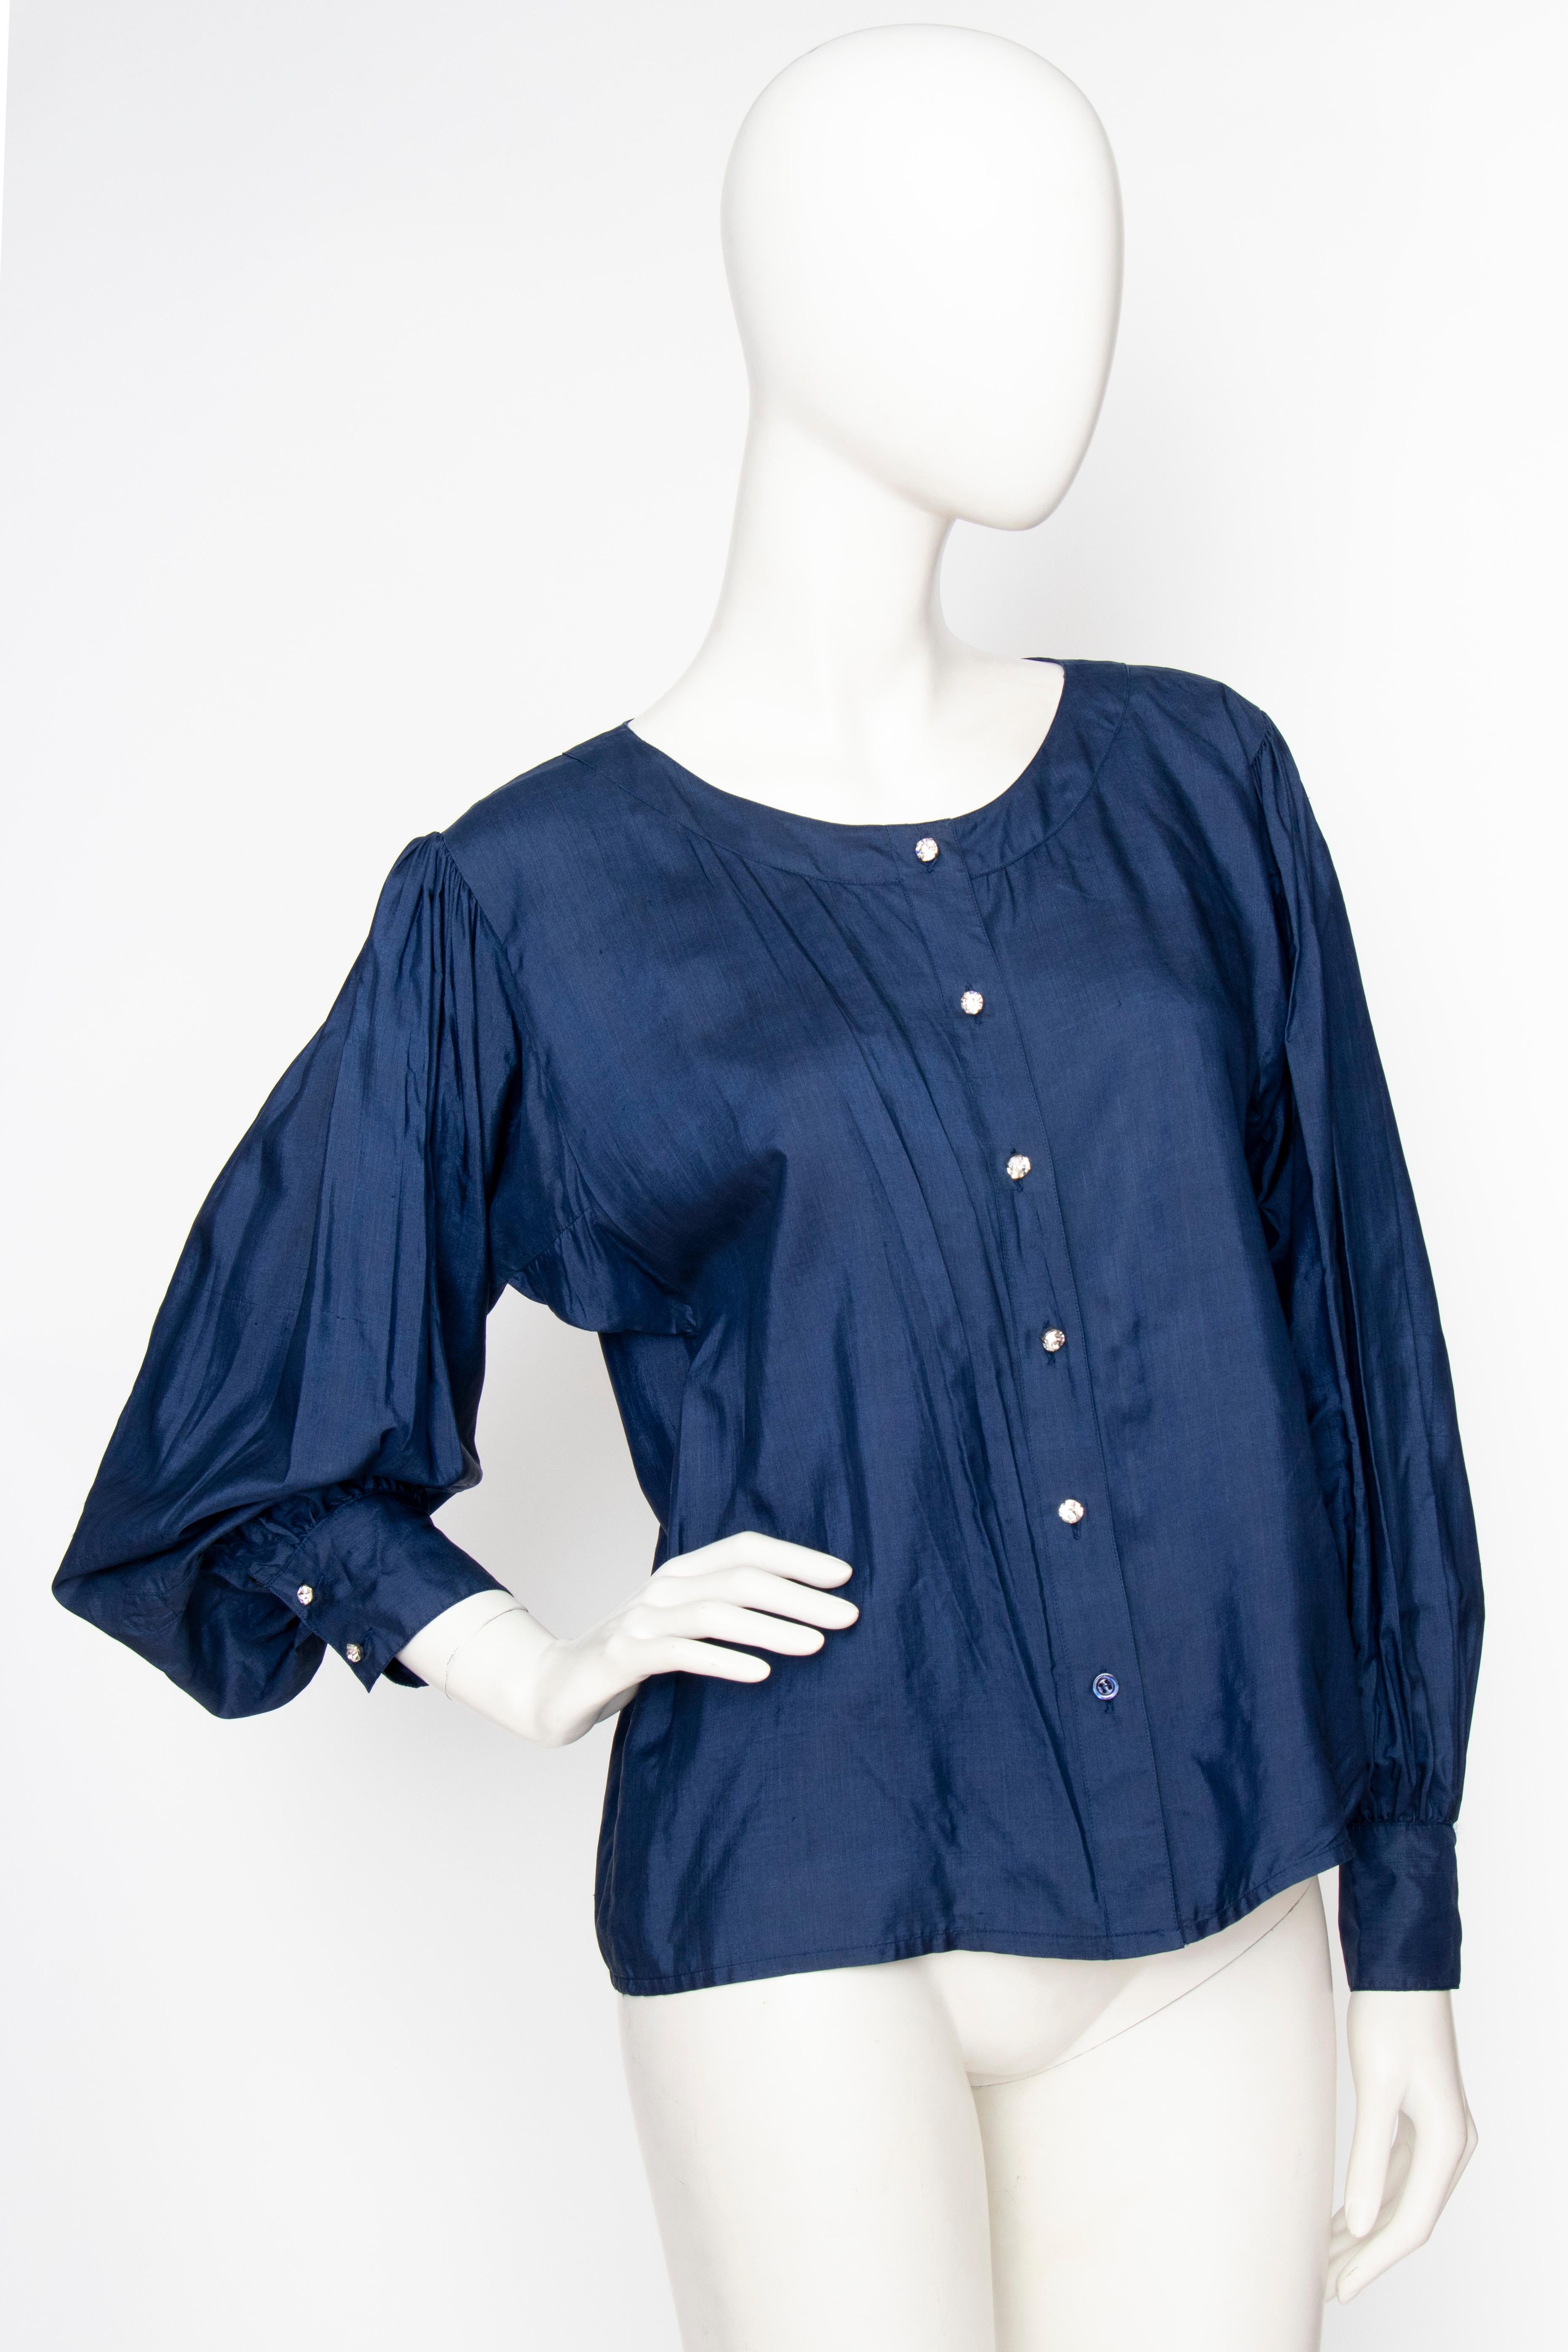 An early 1980s Yves Saint Laurent Rive Gauche blue silk blouse with a round neckline, a button-down front and voluminous sleeves. The blouse is unlined and has large clear rhinestone-studded buttons. 

The size corresponds to a modern size medium,